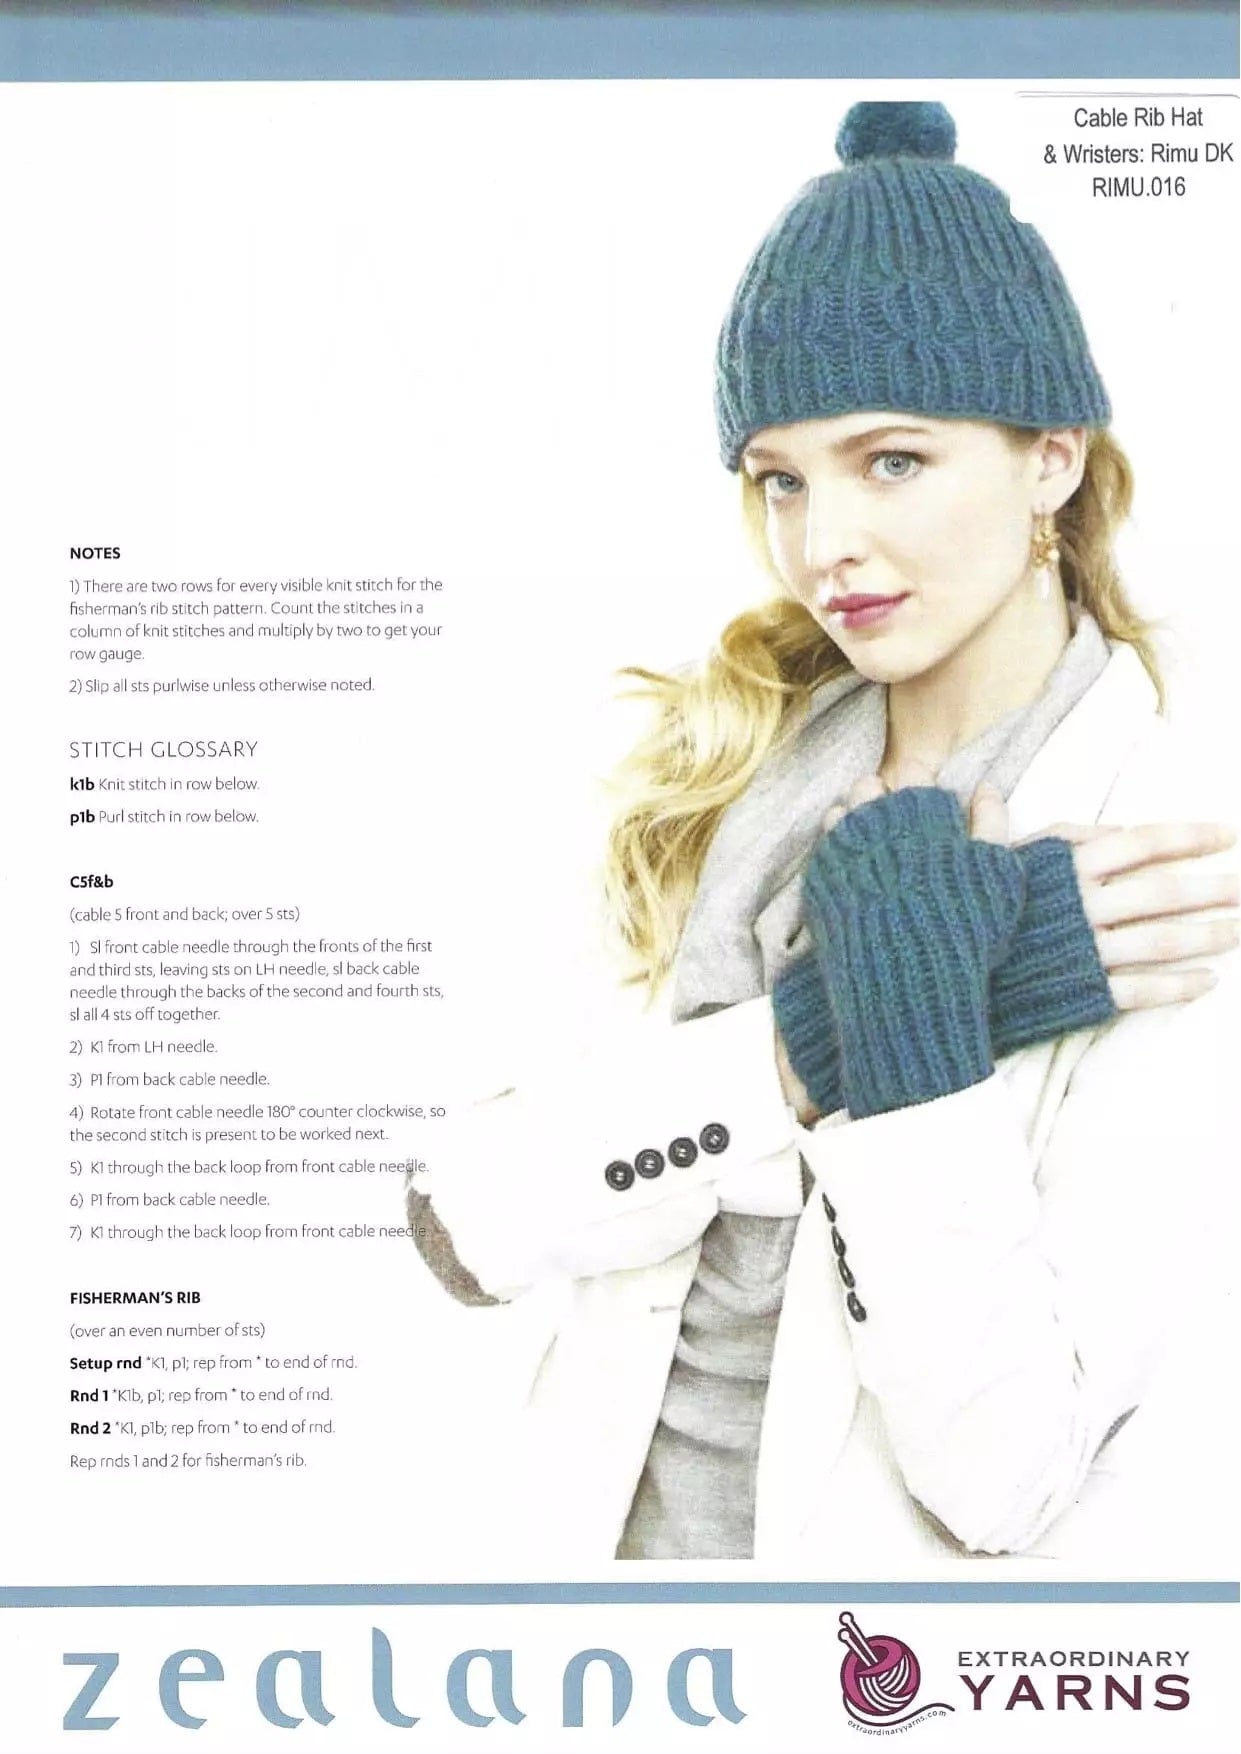 Patterns - Accessories - Cable rib hat & mitts RIMU.016